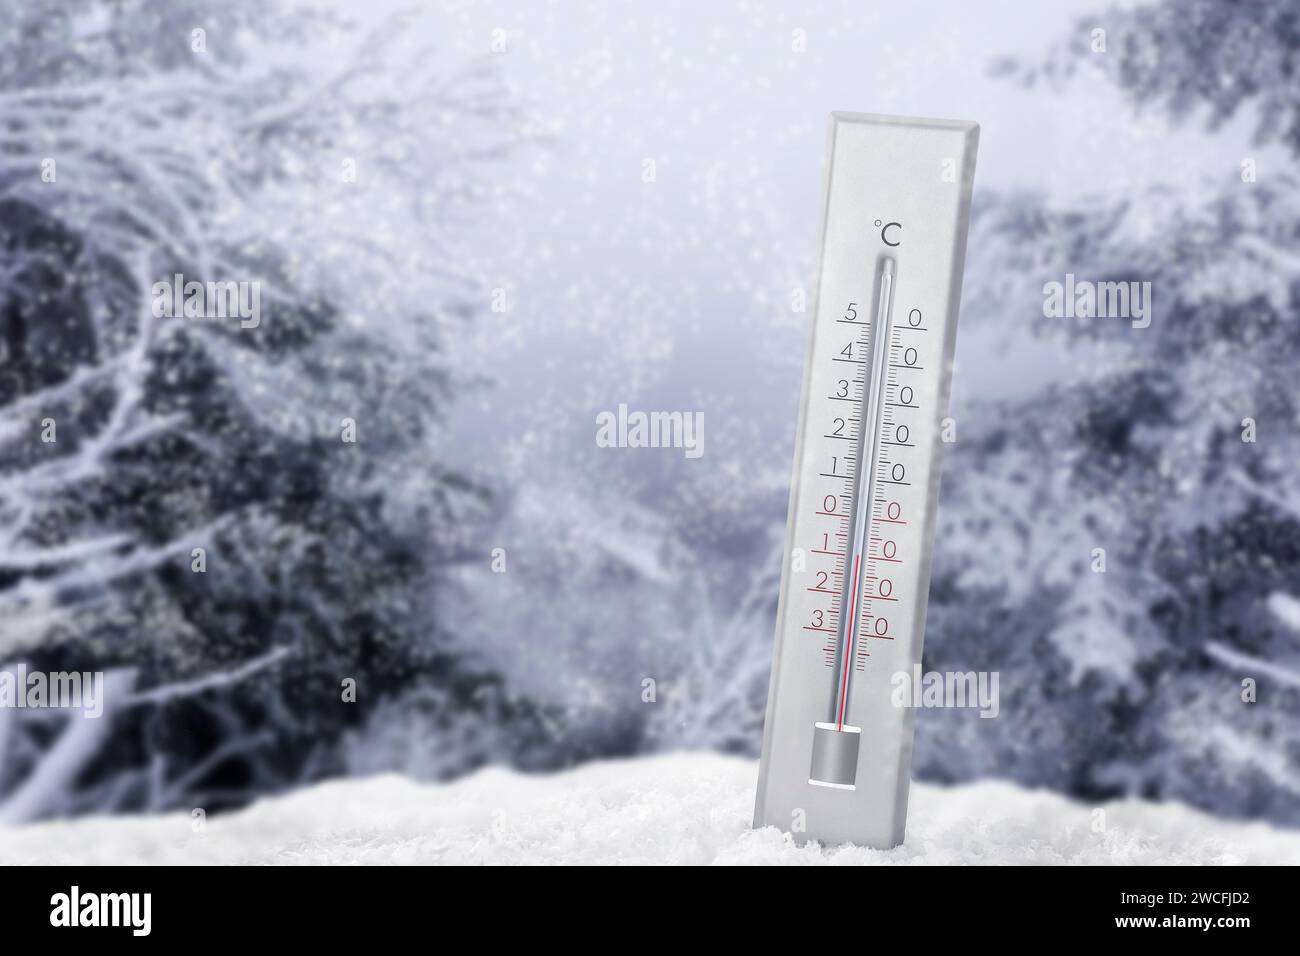 Thermometer in snow showing temperature below zero outdoors on winter day Stock Photo